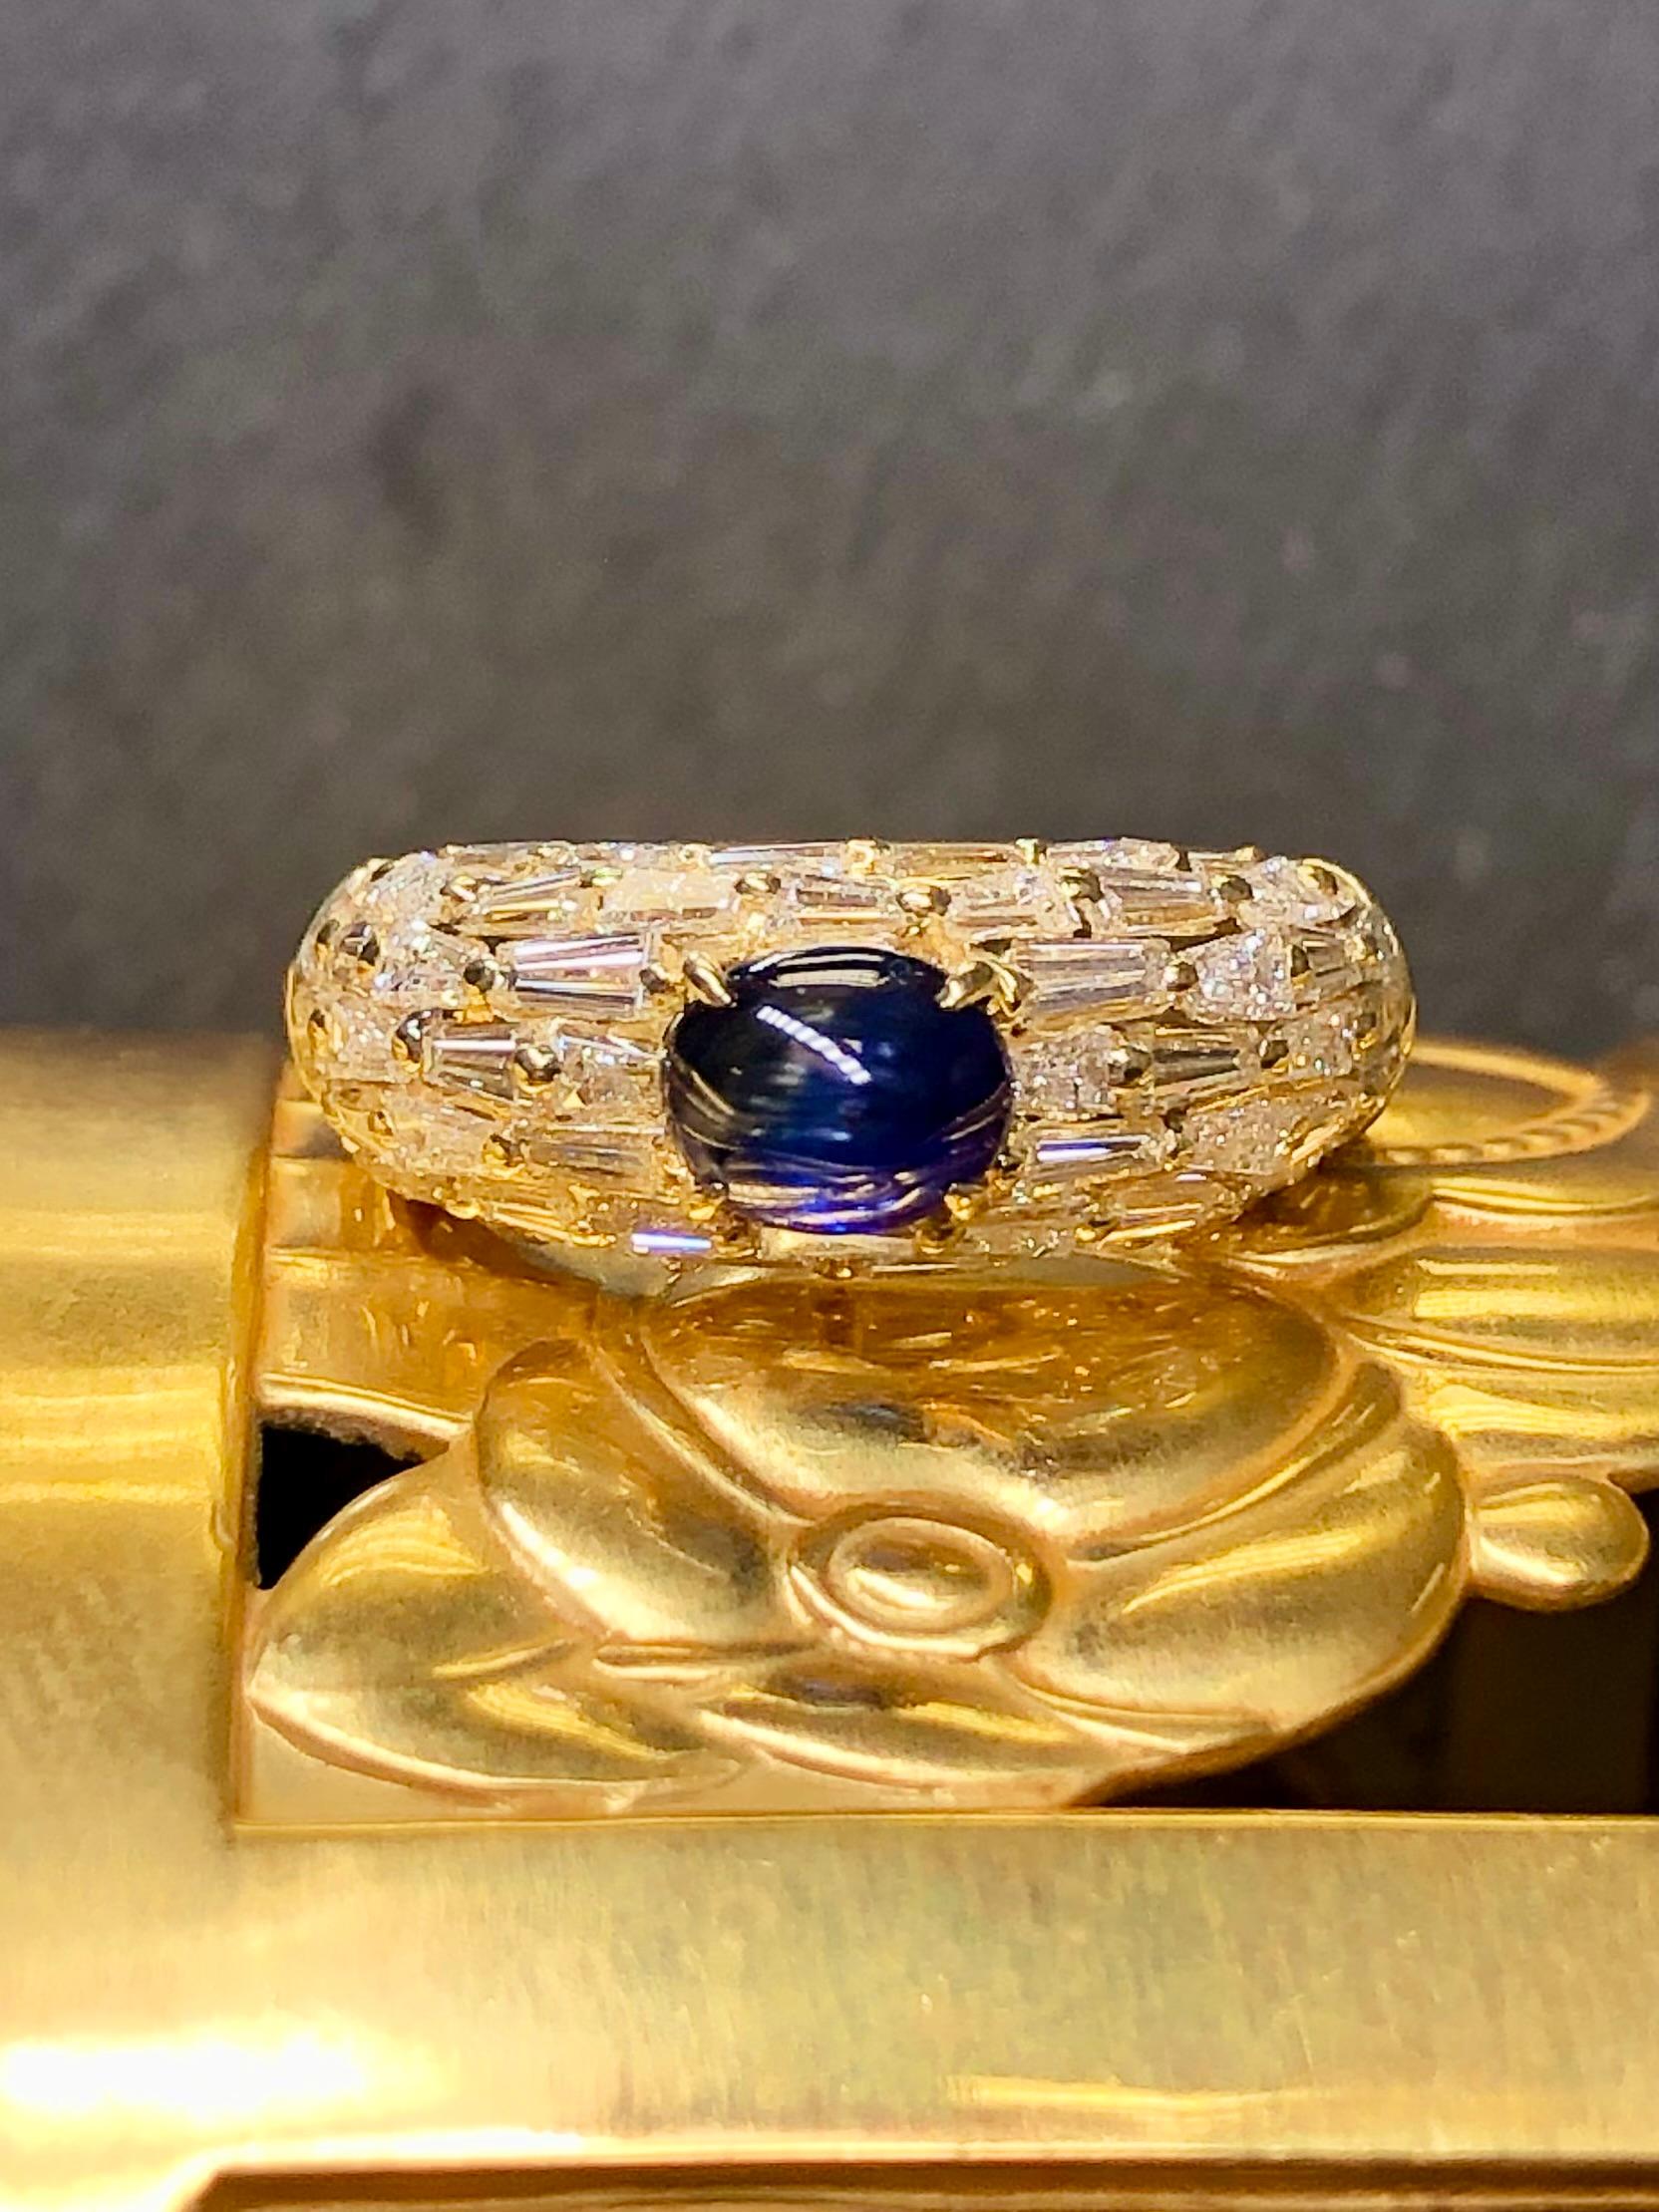 
A bright and lively ring done in 18K yellow gold and set with approximately 2.70cttw in G-H color Vs1-2 clarity tapered baguette diamonds and centered by an approximately 1.20ct royal blue natural cabochon sapphire.


Dimensions/Weight:

Ring